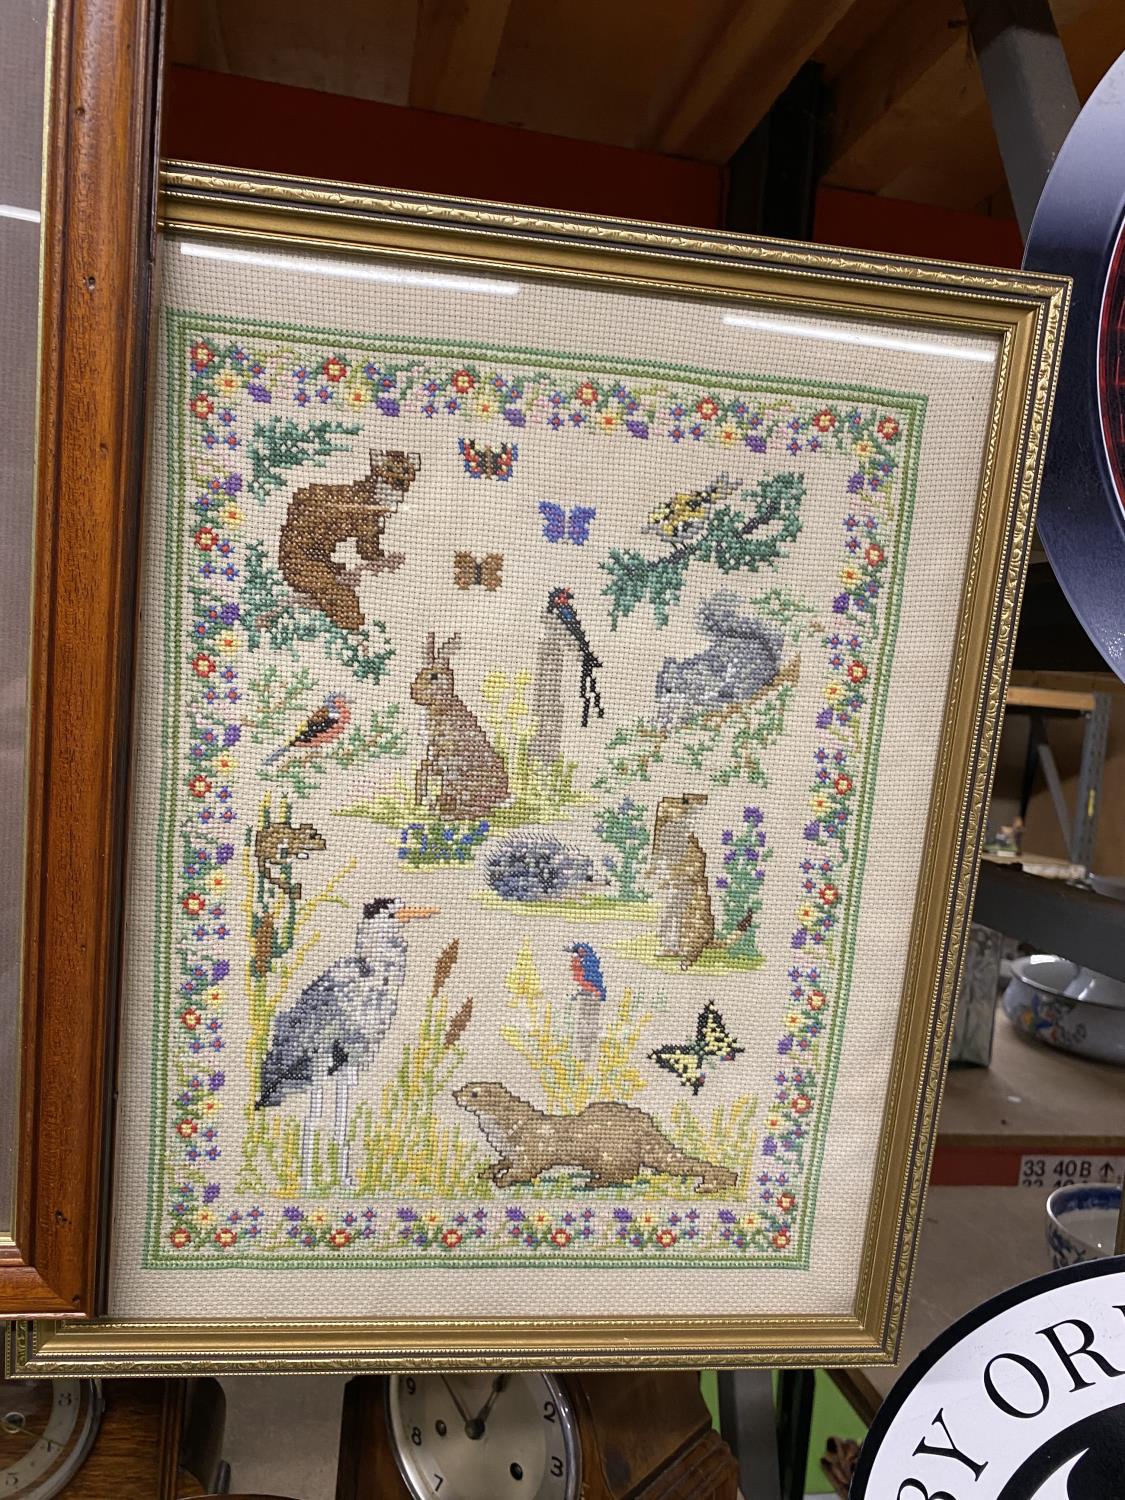 THREE FRAMED TAPESTRIES WITH IMAGES OF THE ALPHABET, FLOWERS, AND ANIMALS - Image 4 of 4